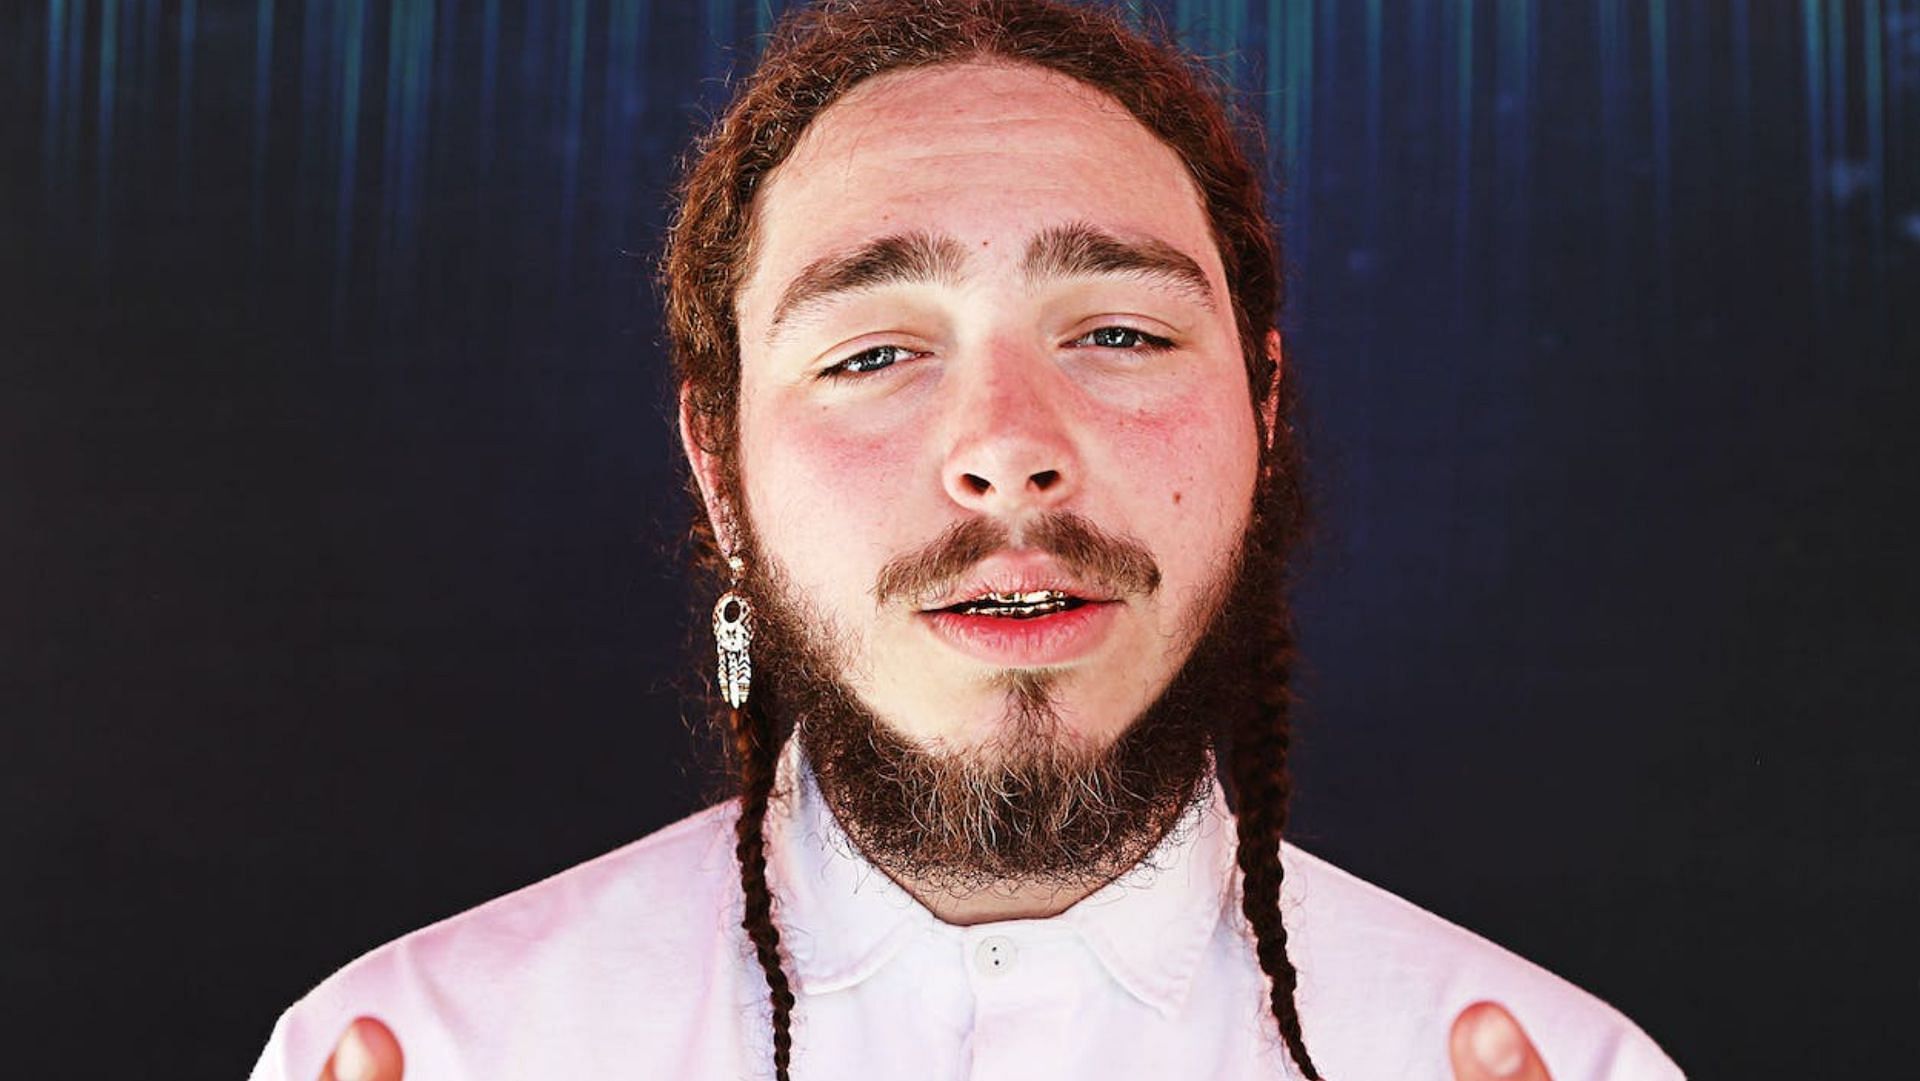 Post Malone has been hospitalized. (Image via Randy Shropshire/Getty Images)